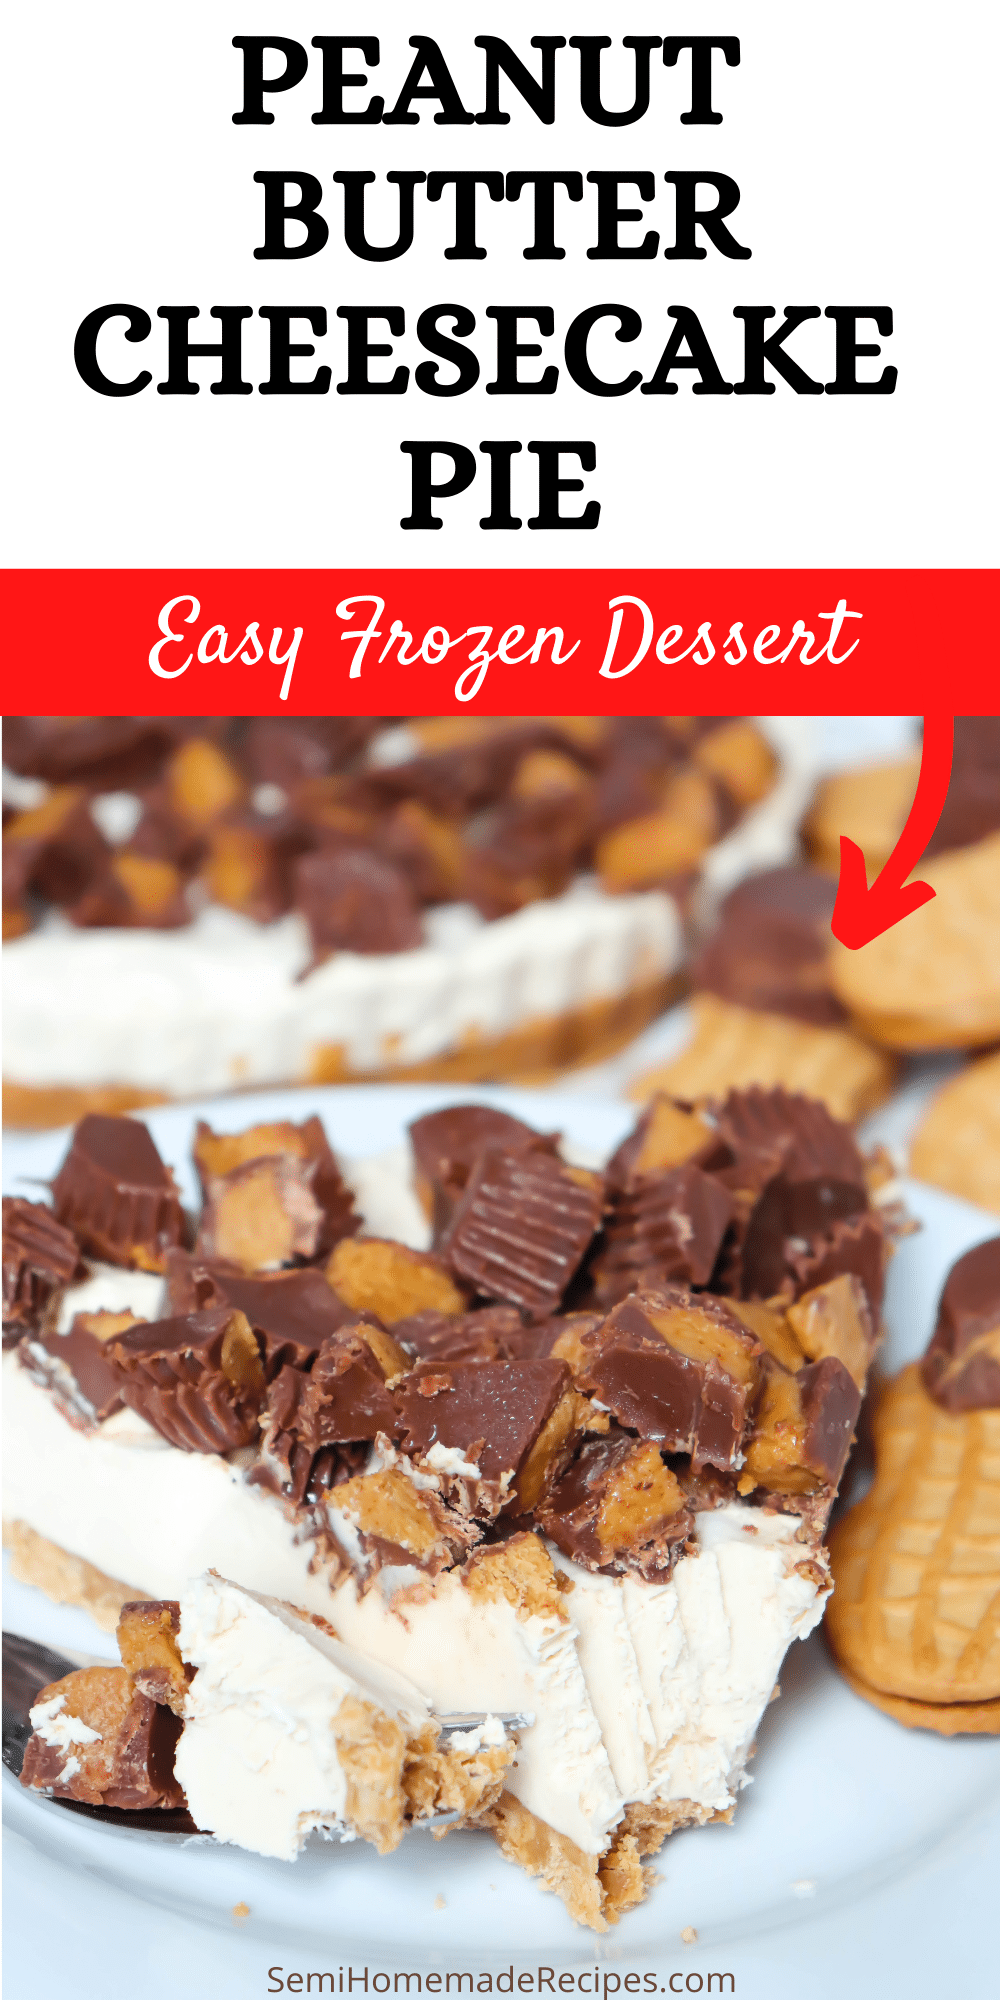 This Frozen Peanut Butter Cheesecake is the perfect chilly dessert to enjoy after your meal or for a special occasion! It has peanut butter cookie crust, homemade peanut butter cheesecake filling and it is topped with chopped peanut butter cups! via @bigbearswife